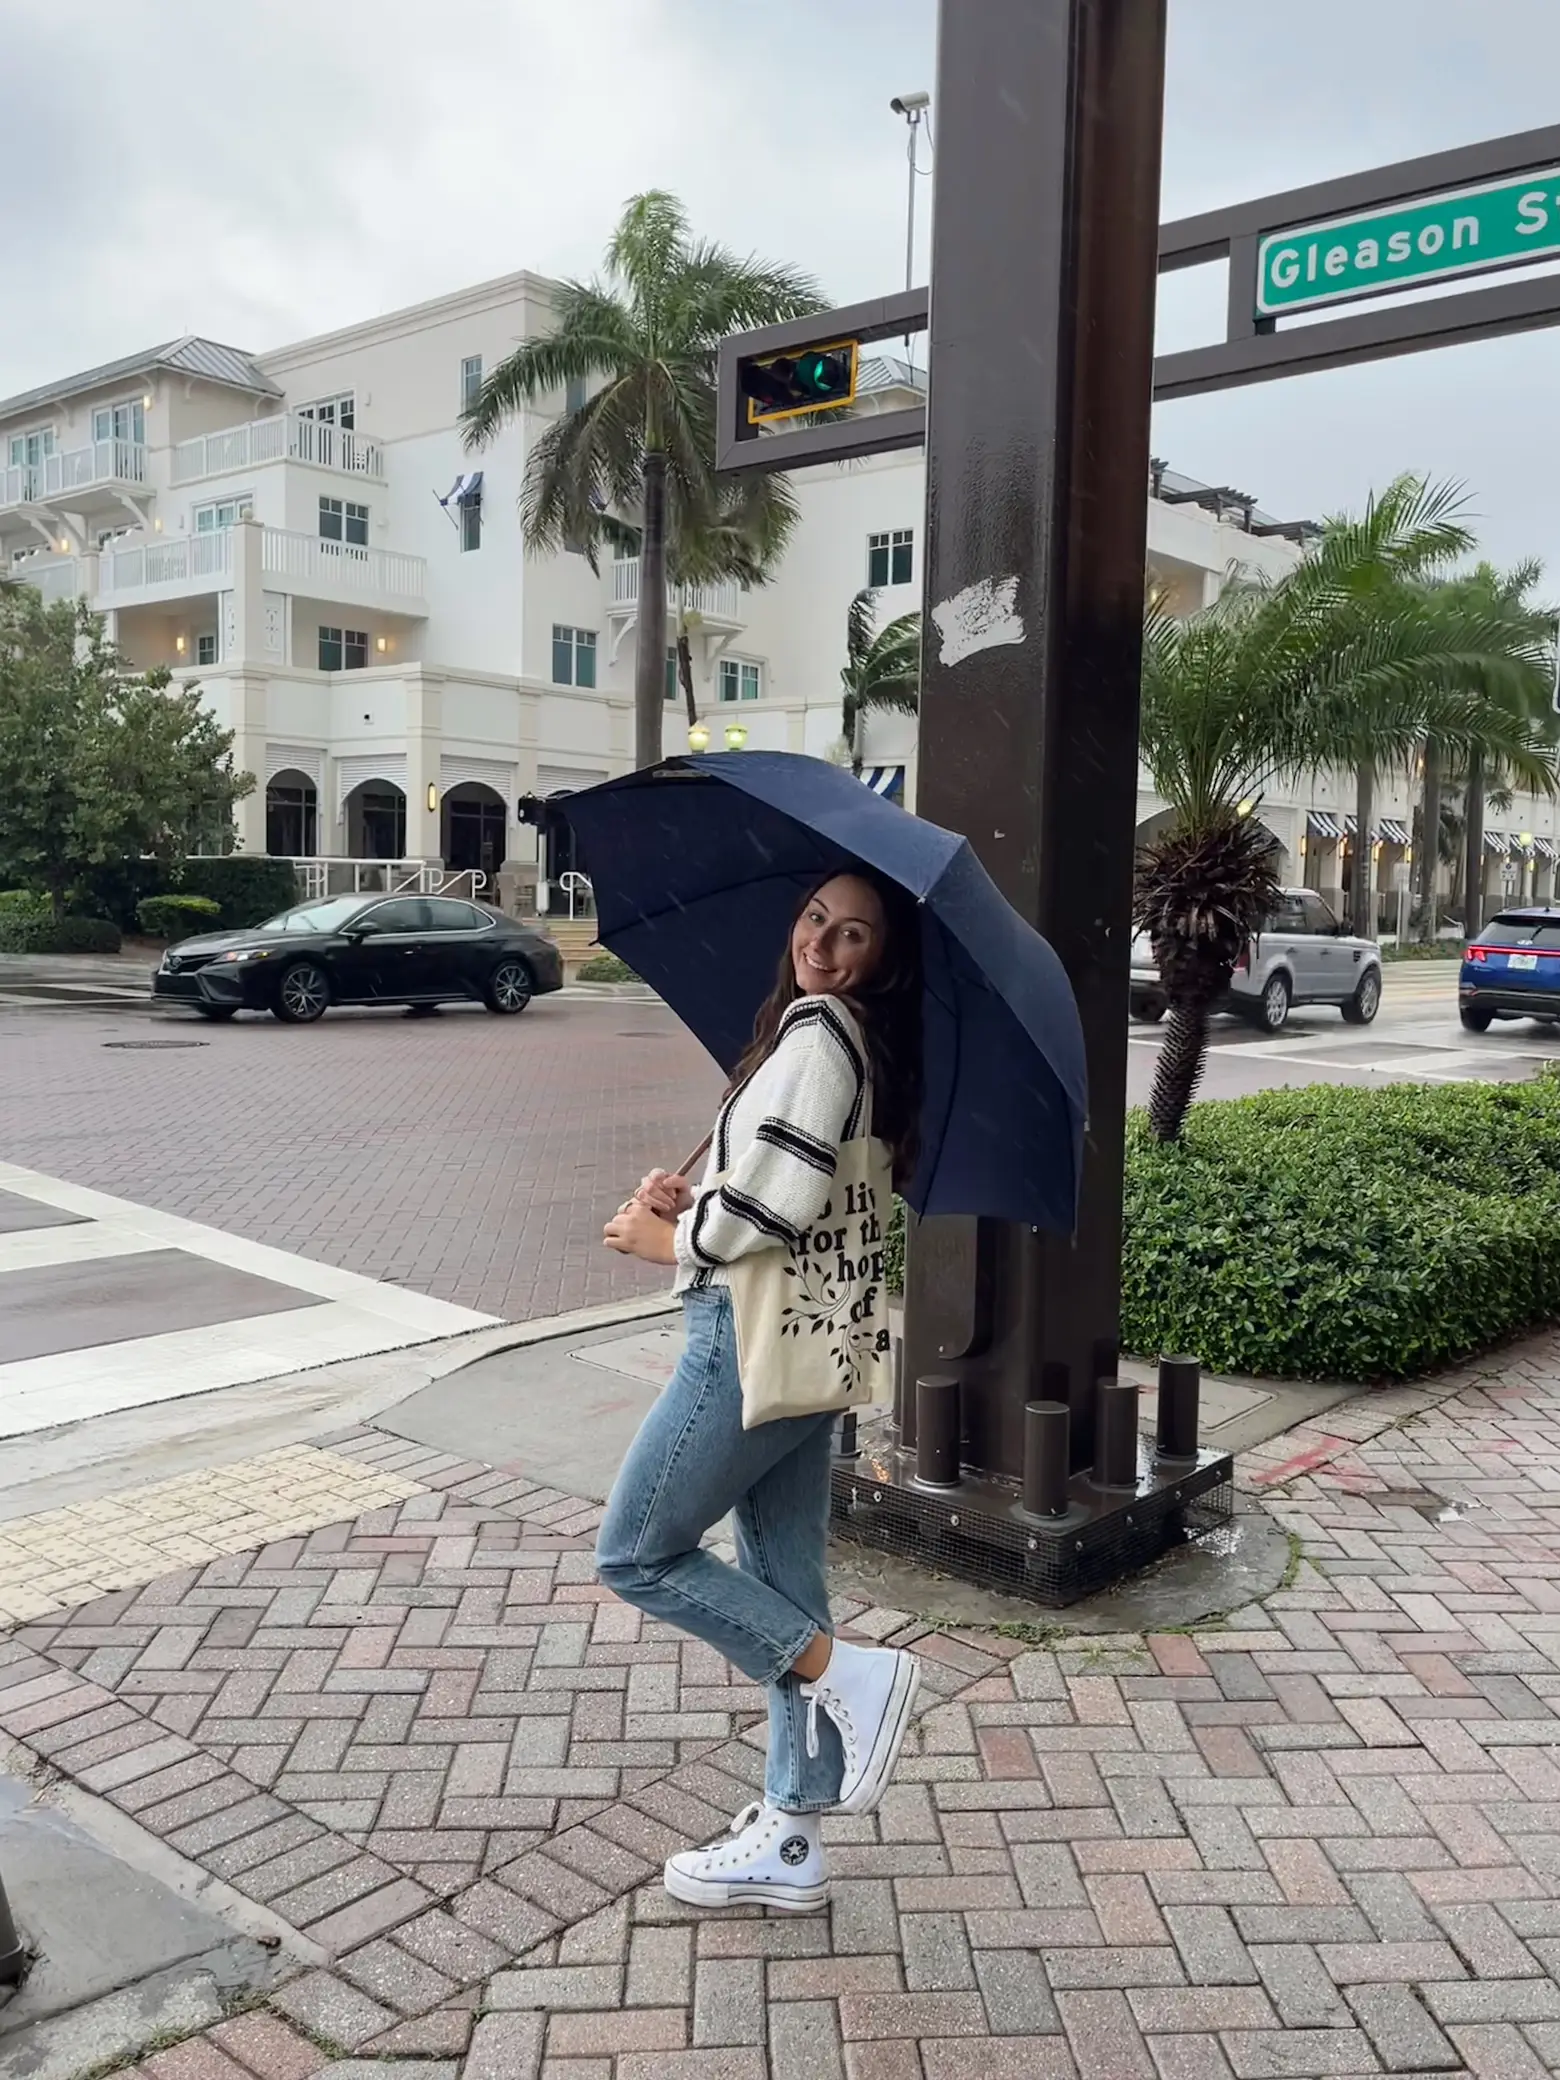  A woman is standing on a sidewalk holding an umbrella and a bag.